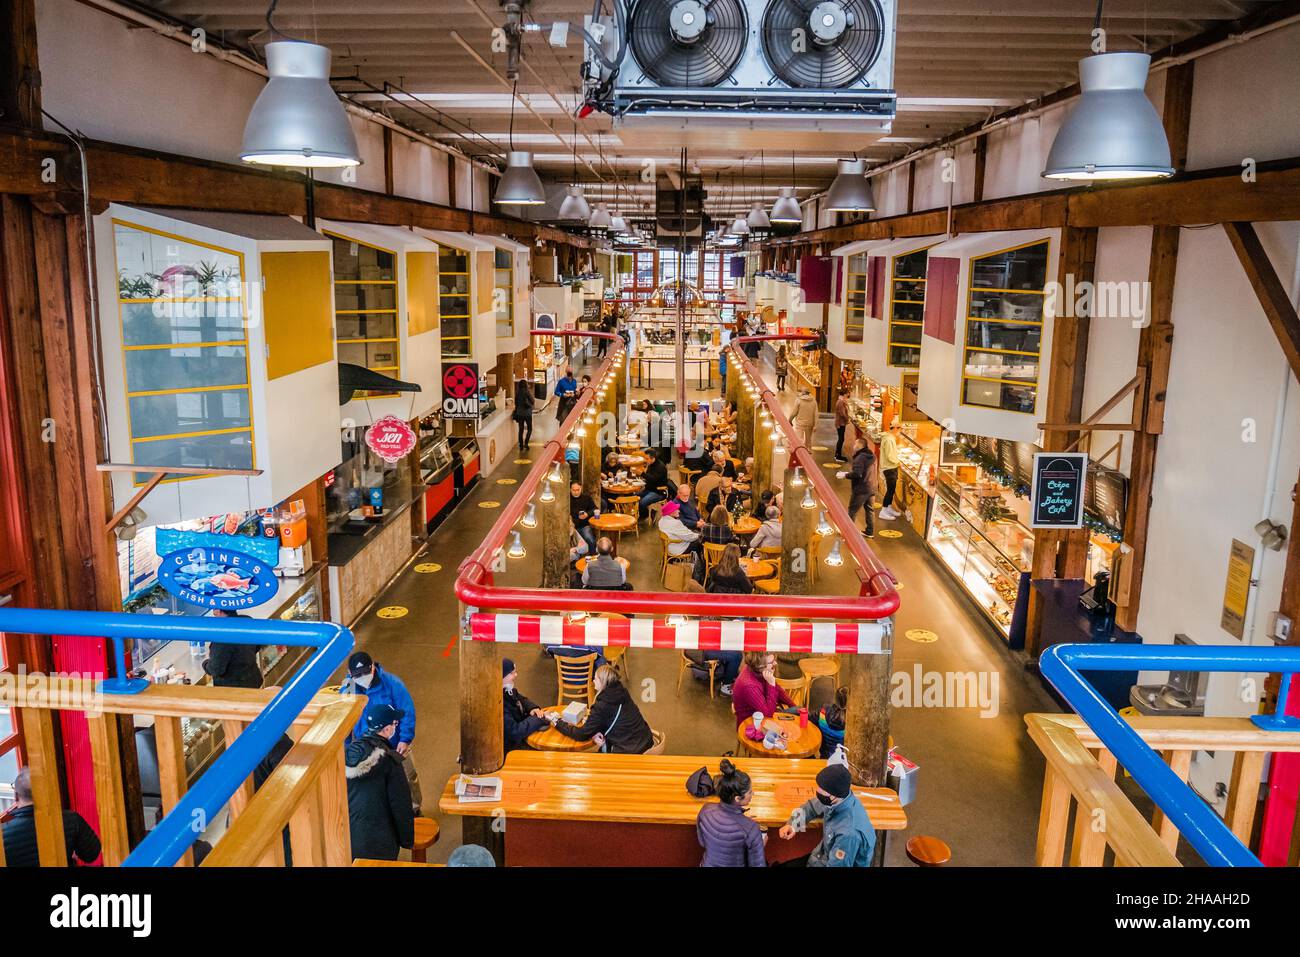 Granville Island was once an industrial manufacturing area, but today it is now a hotspot for Vancouver tourism and entertainment.  The Granville Isla Stock Photo